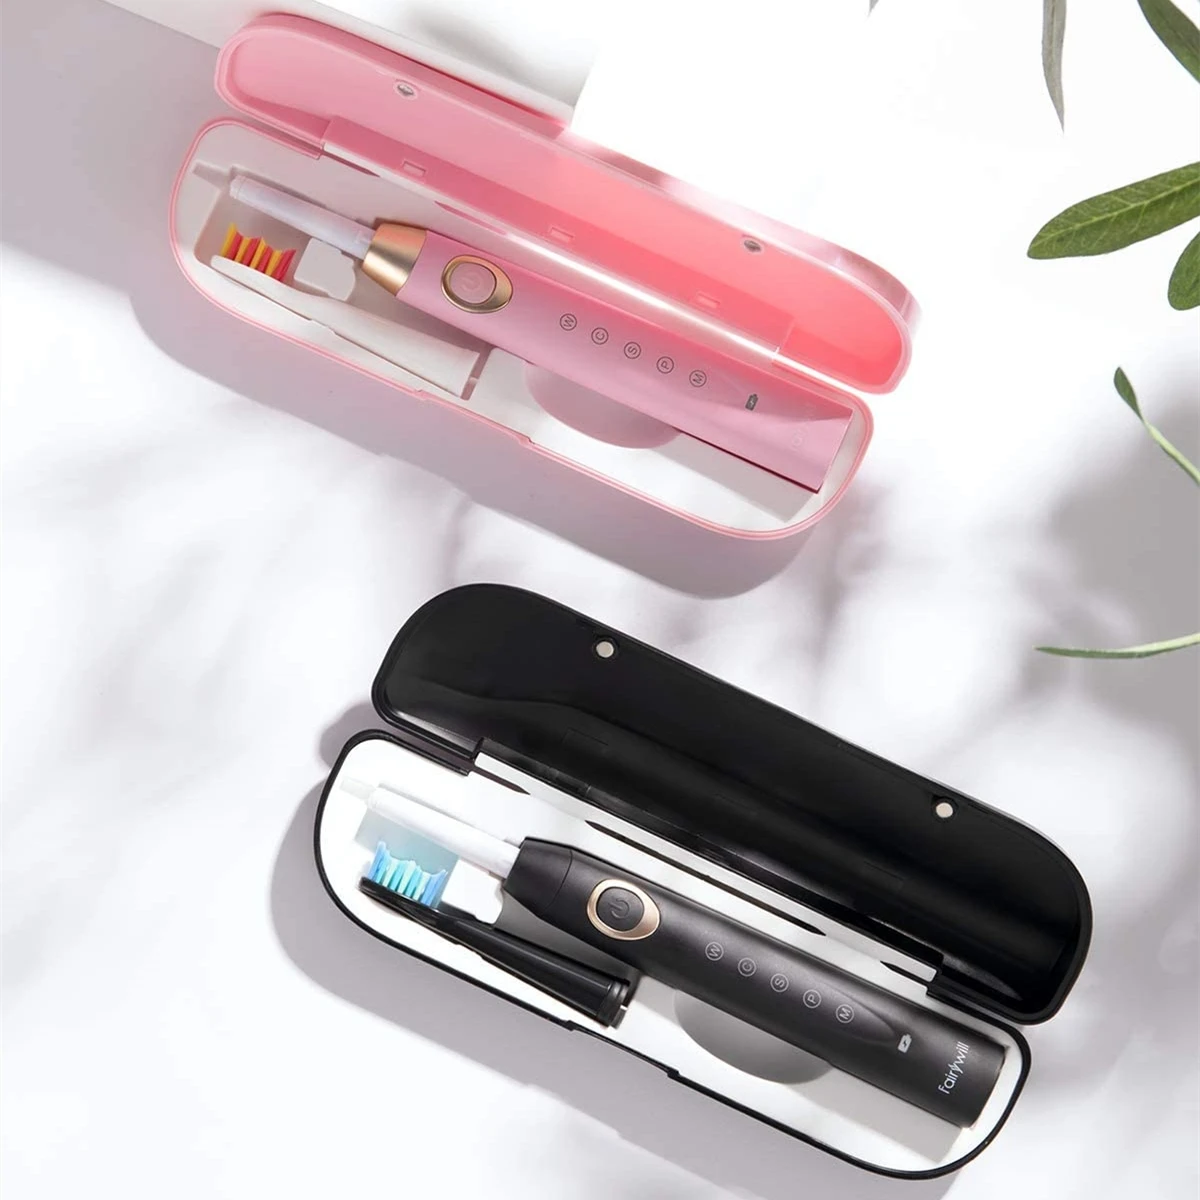 

Fairywill Sonic Electric Toothbrush FW508 Black Pink Combination Fast Charge Toothbrushes With Portable Travel Case